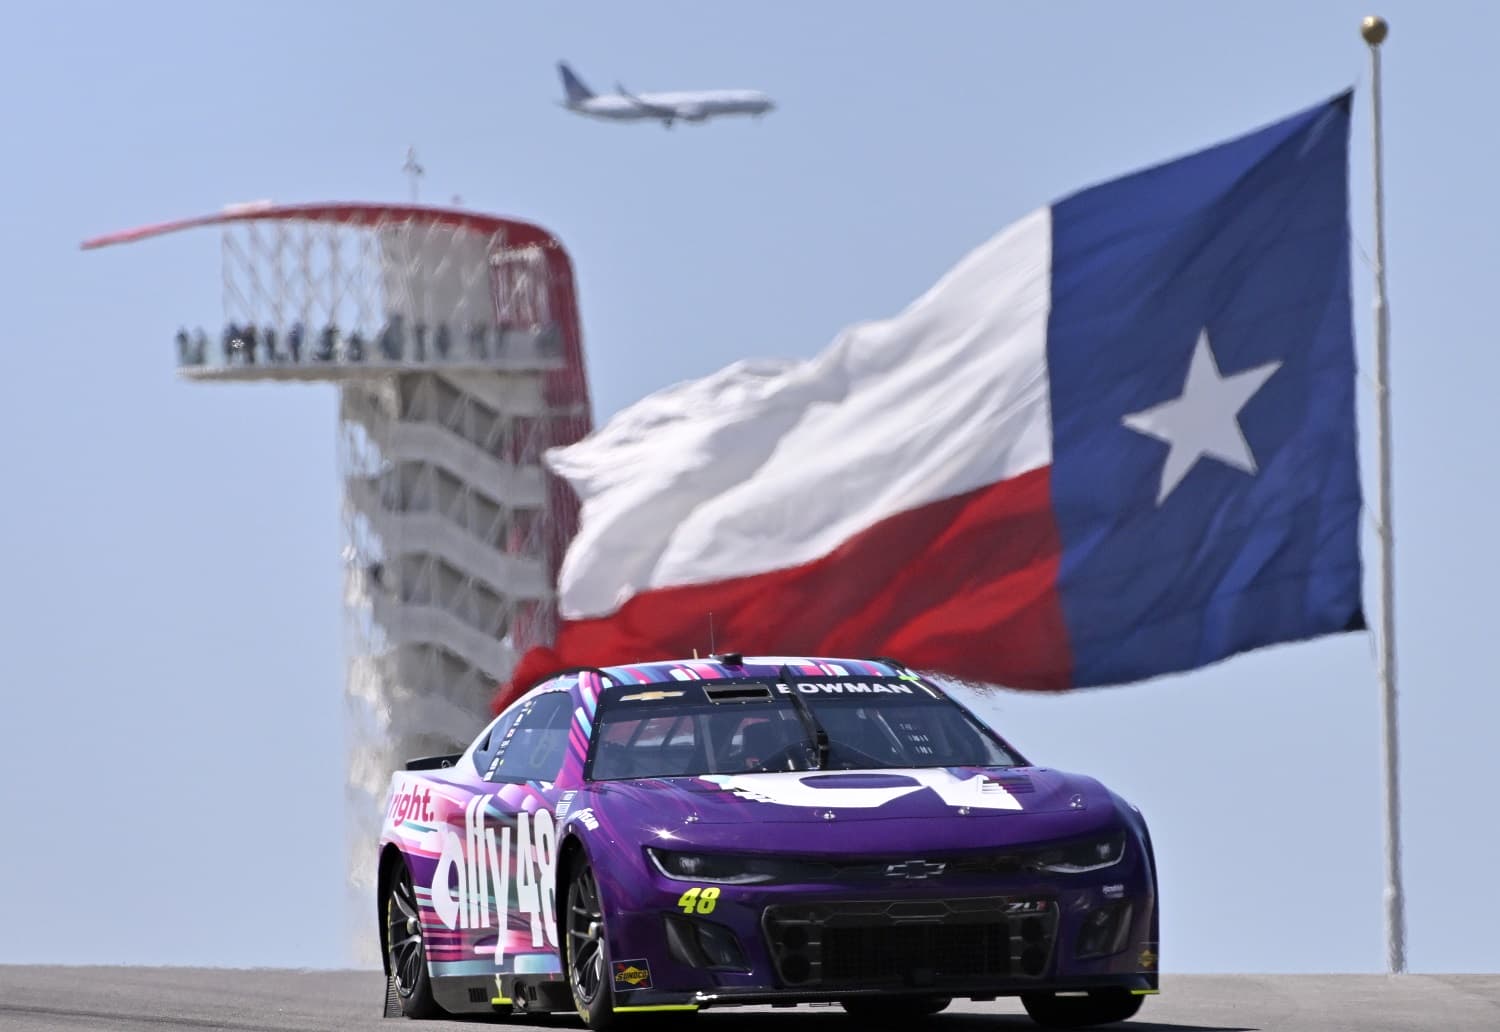 Alex Bowman drives during practice for the NASCAR Cup Series EchoPark Automotive Grand Prix at Circuit of The Americas on March 24, 2023 in Austin, Texas.